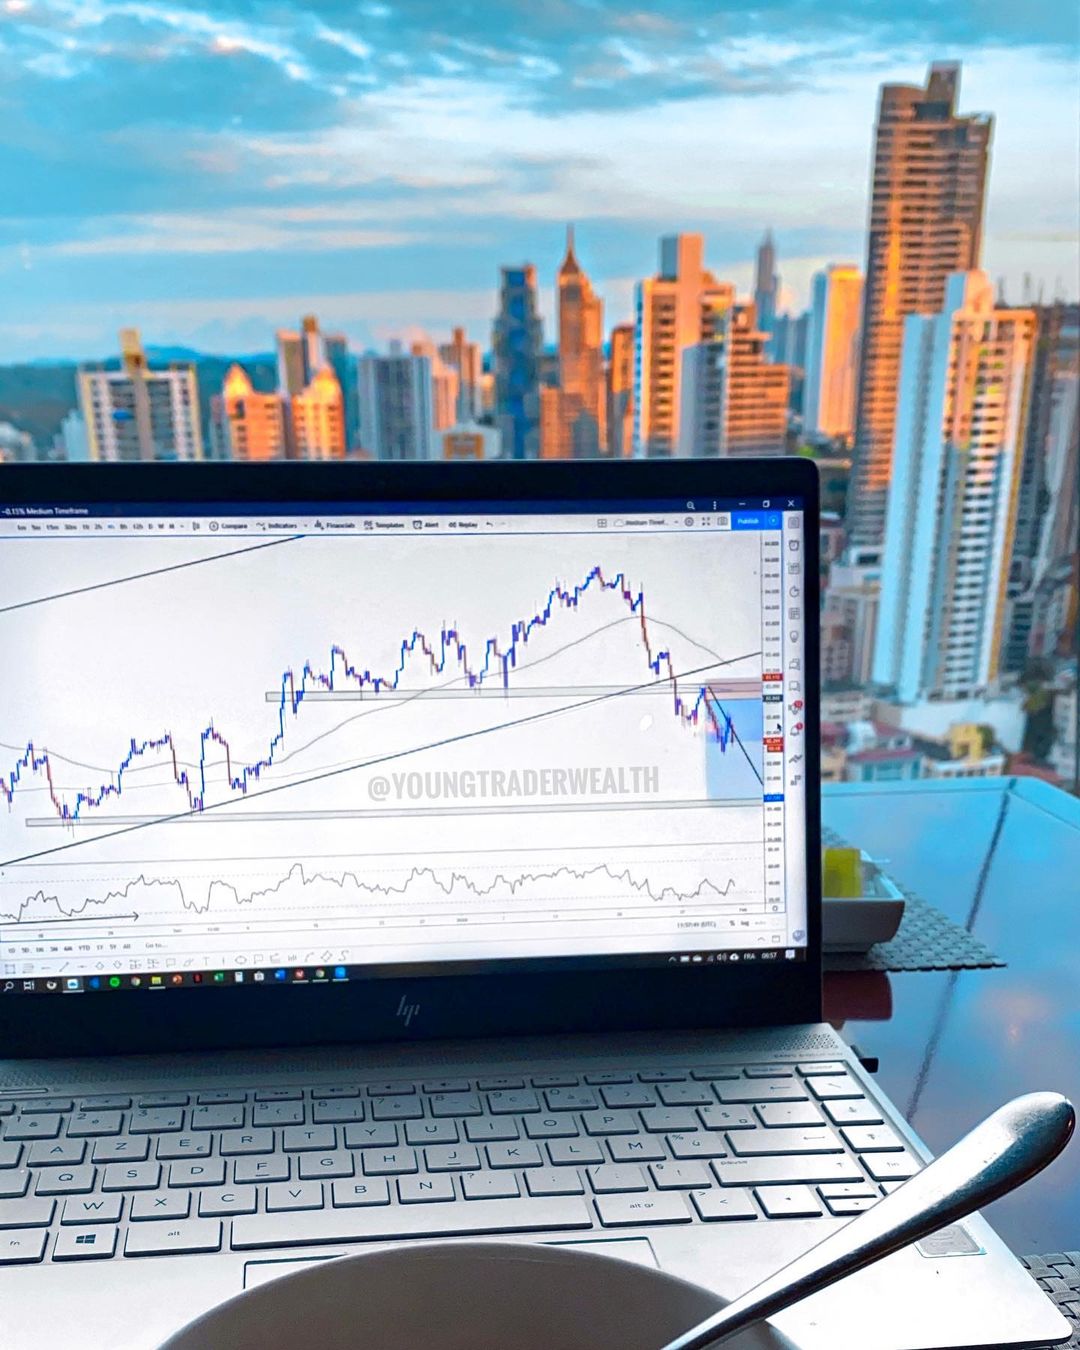 TradingView Chart on Instagram @youngtraderwealth